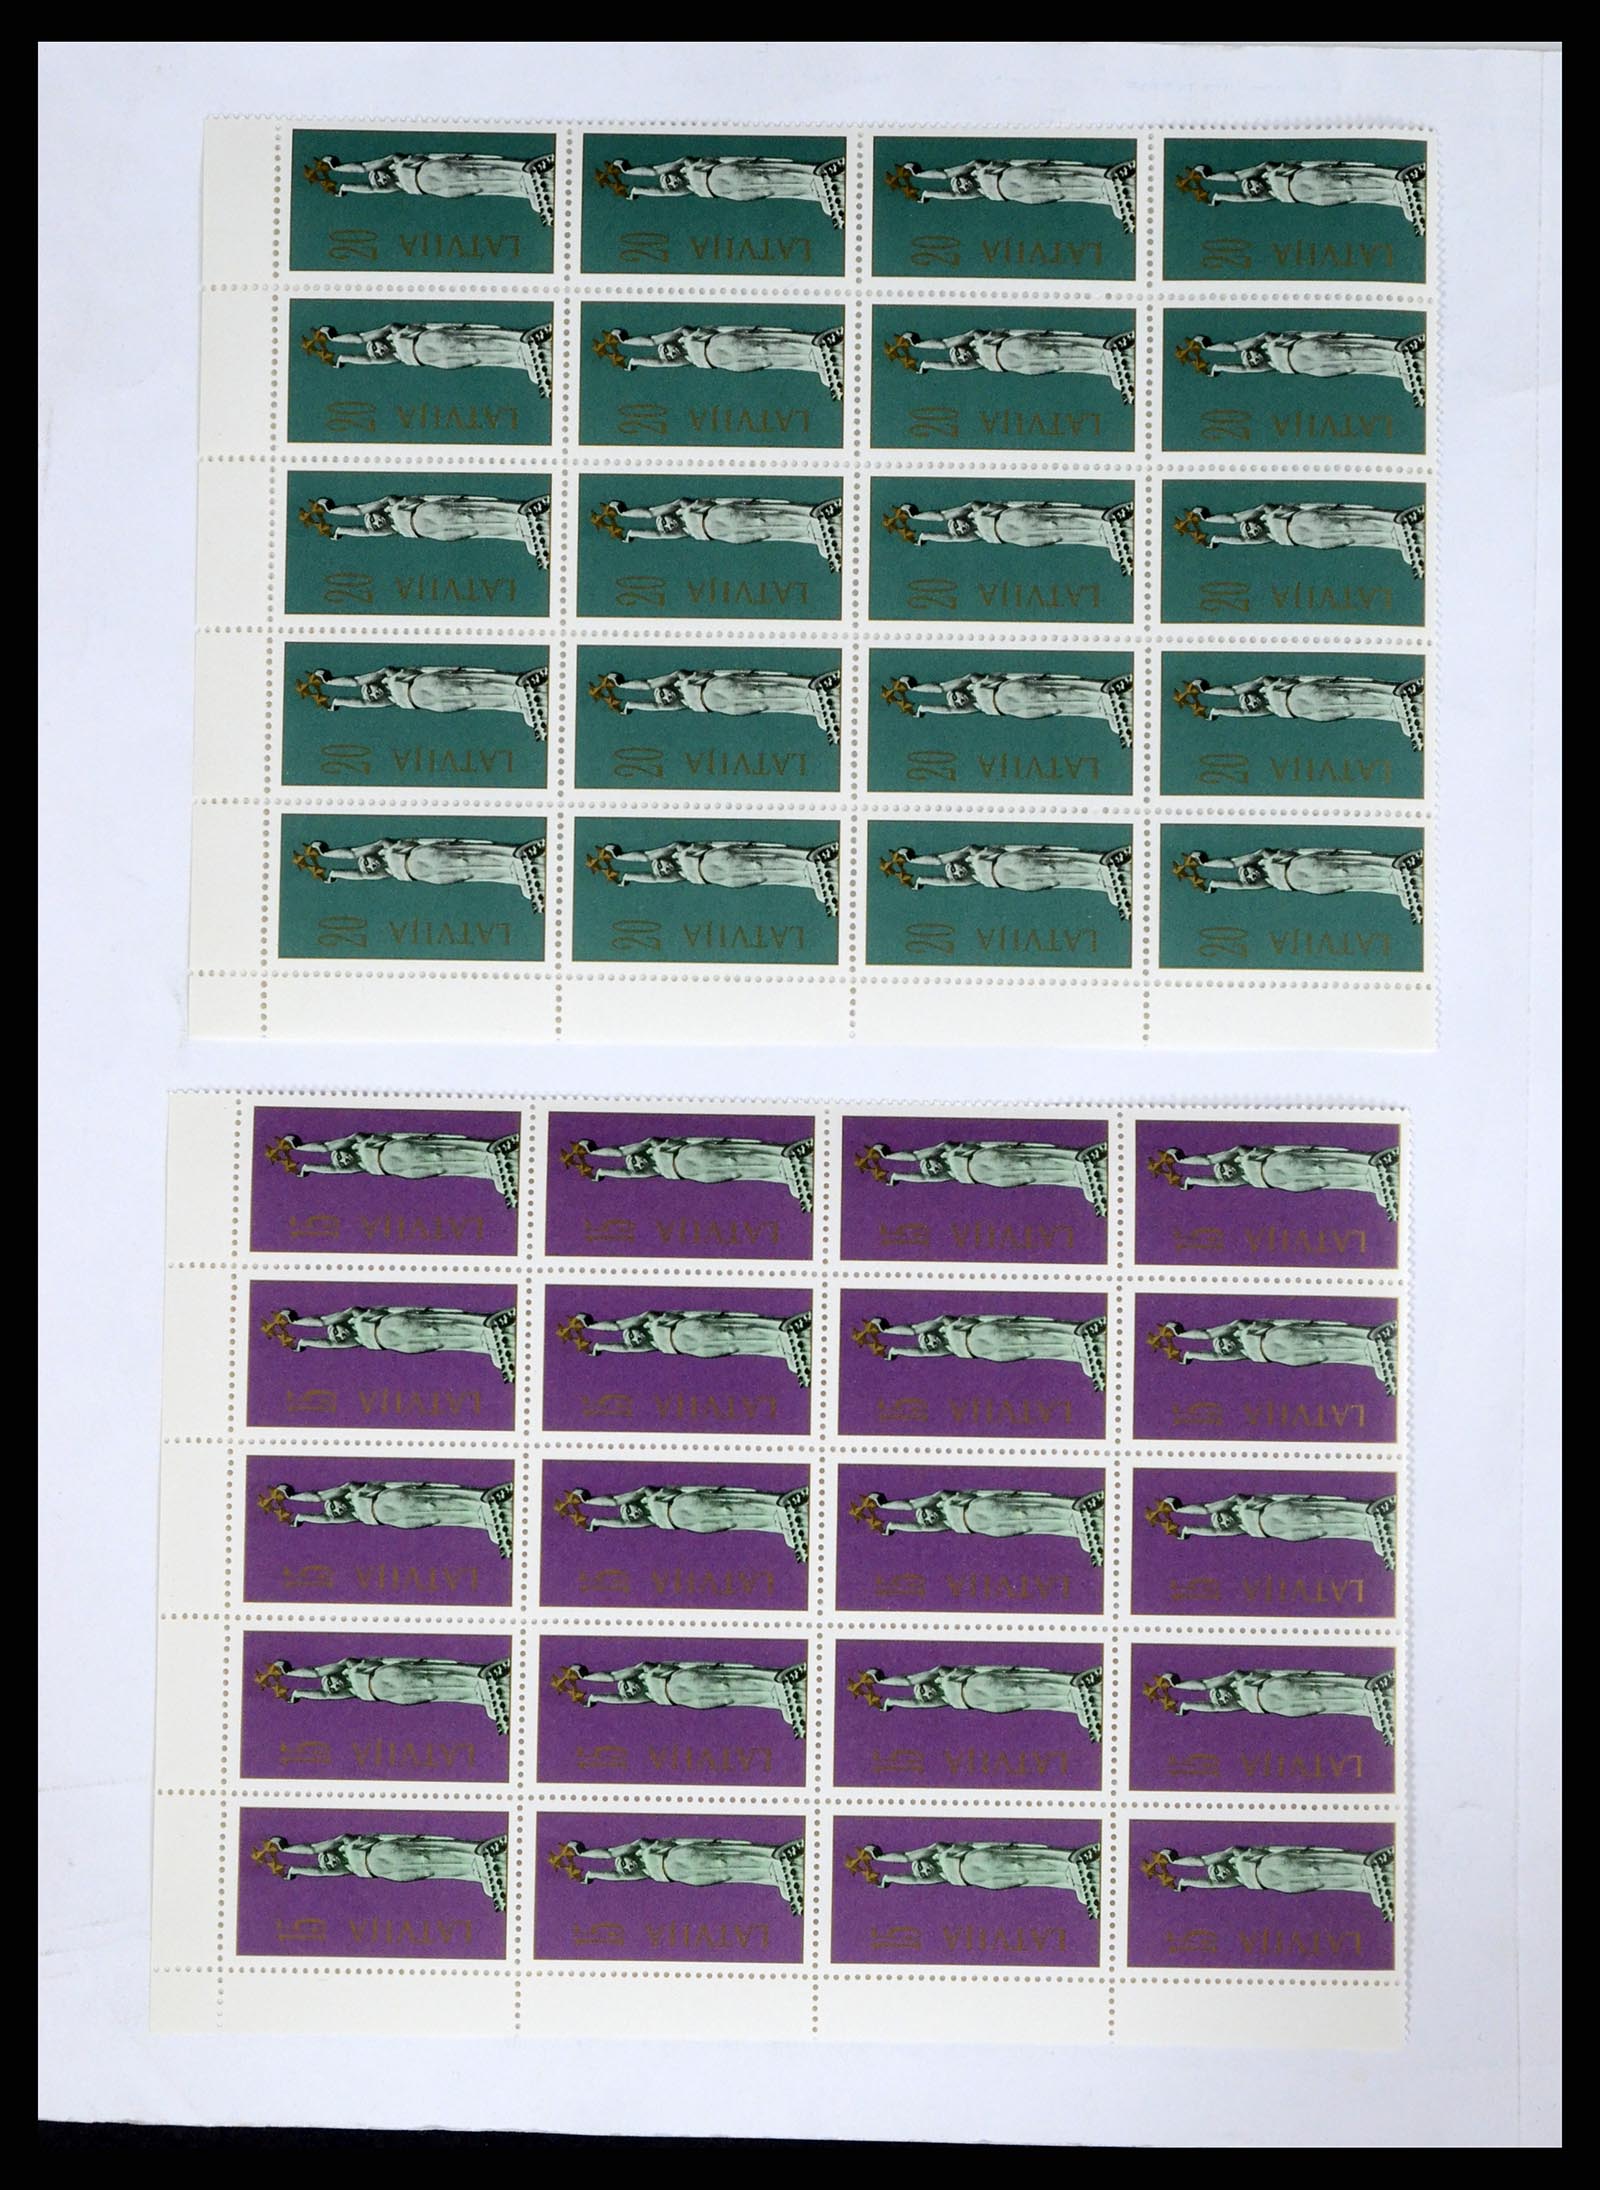 37312 029 - Stamp collection 37312 Latvia and Lithuania 1990-2000.